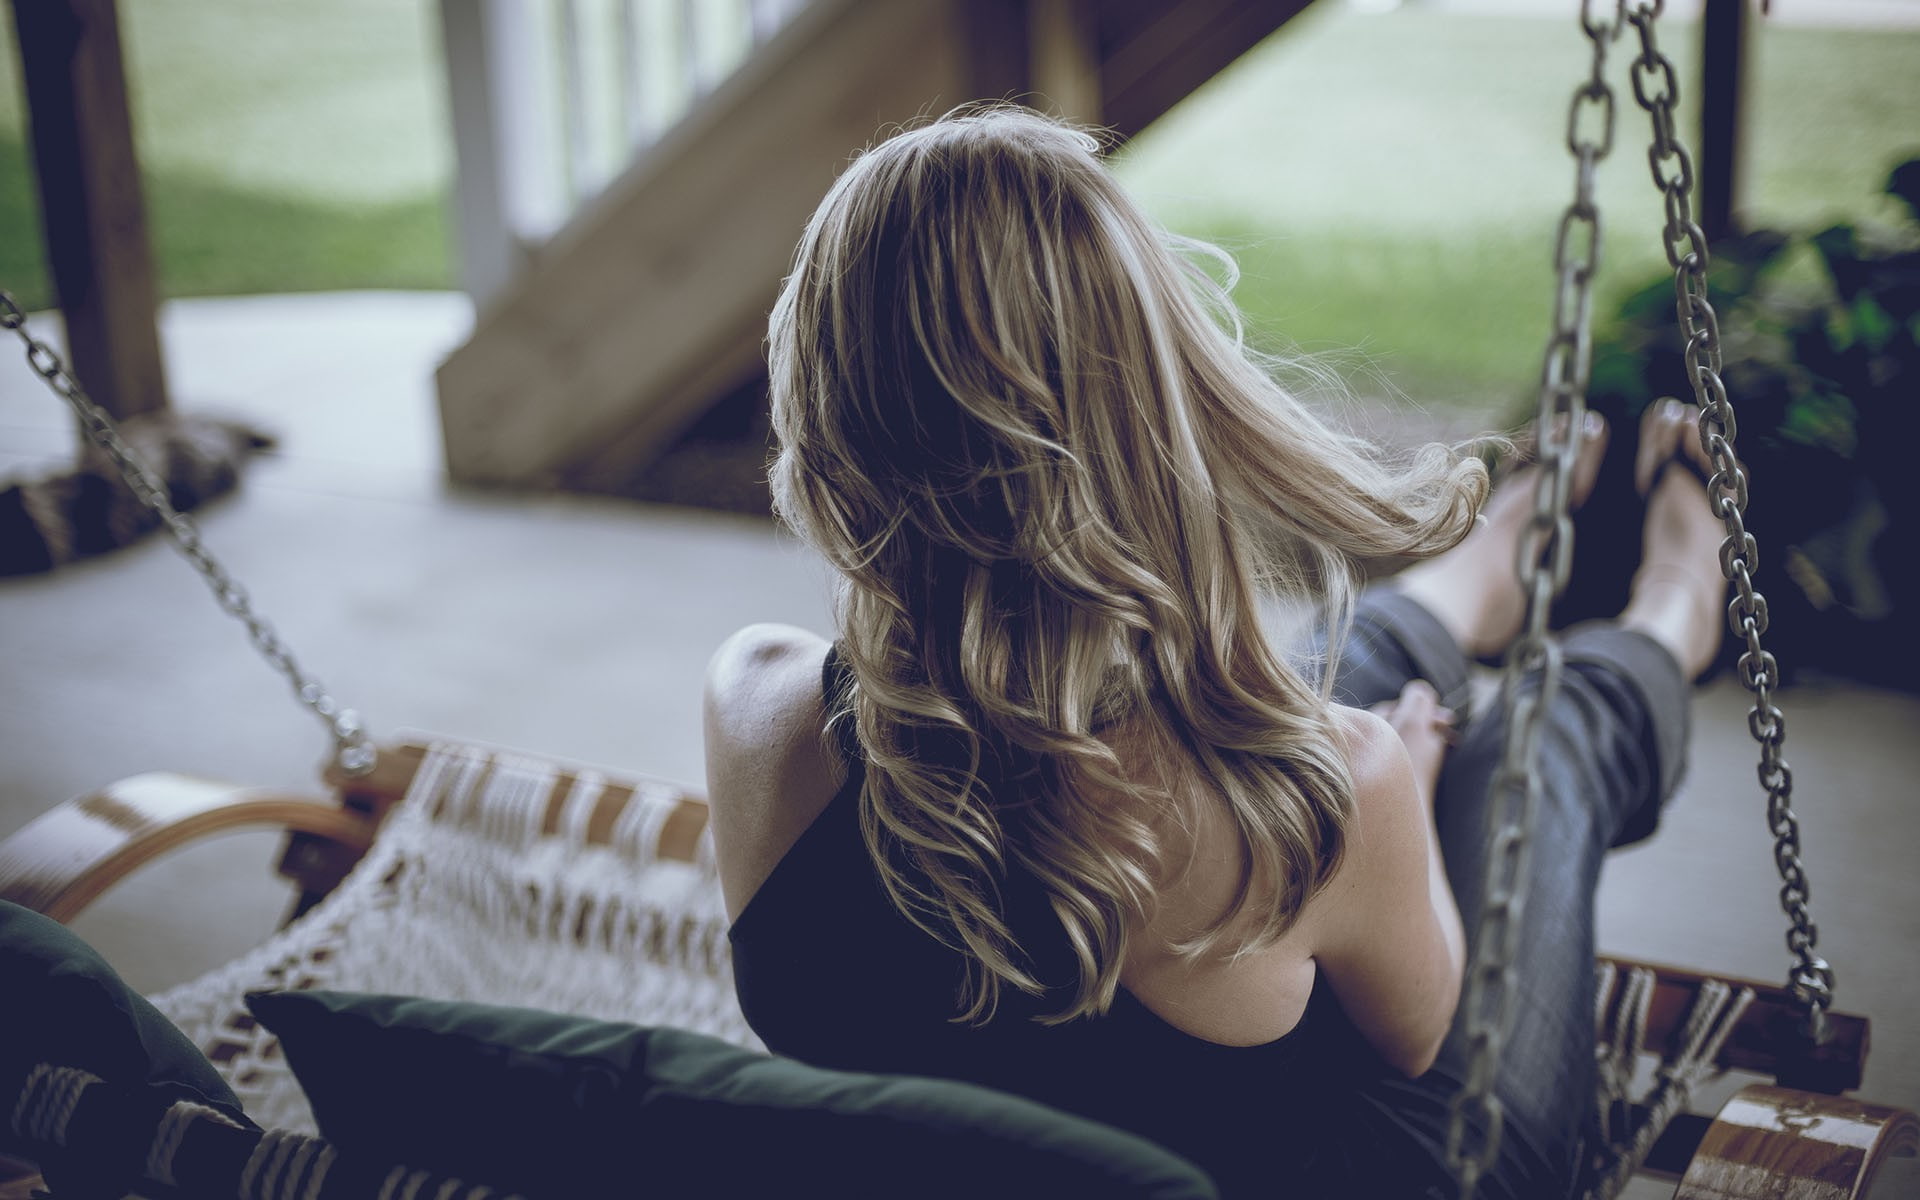 women swings, hair, one person, sitting, blond hair, hairstyle